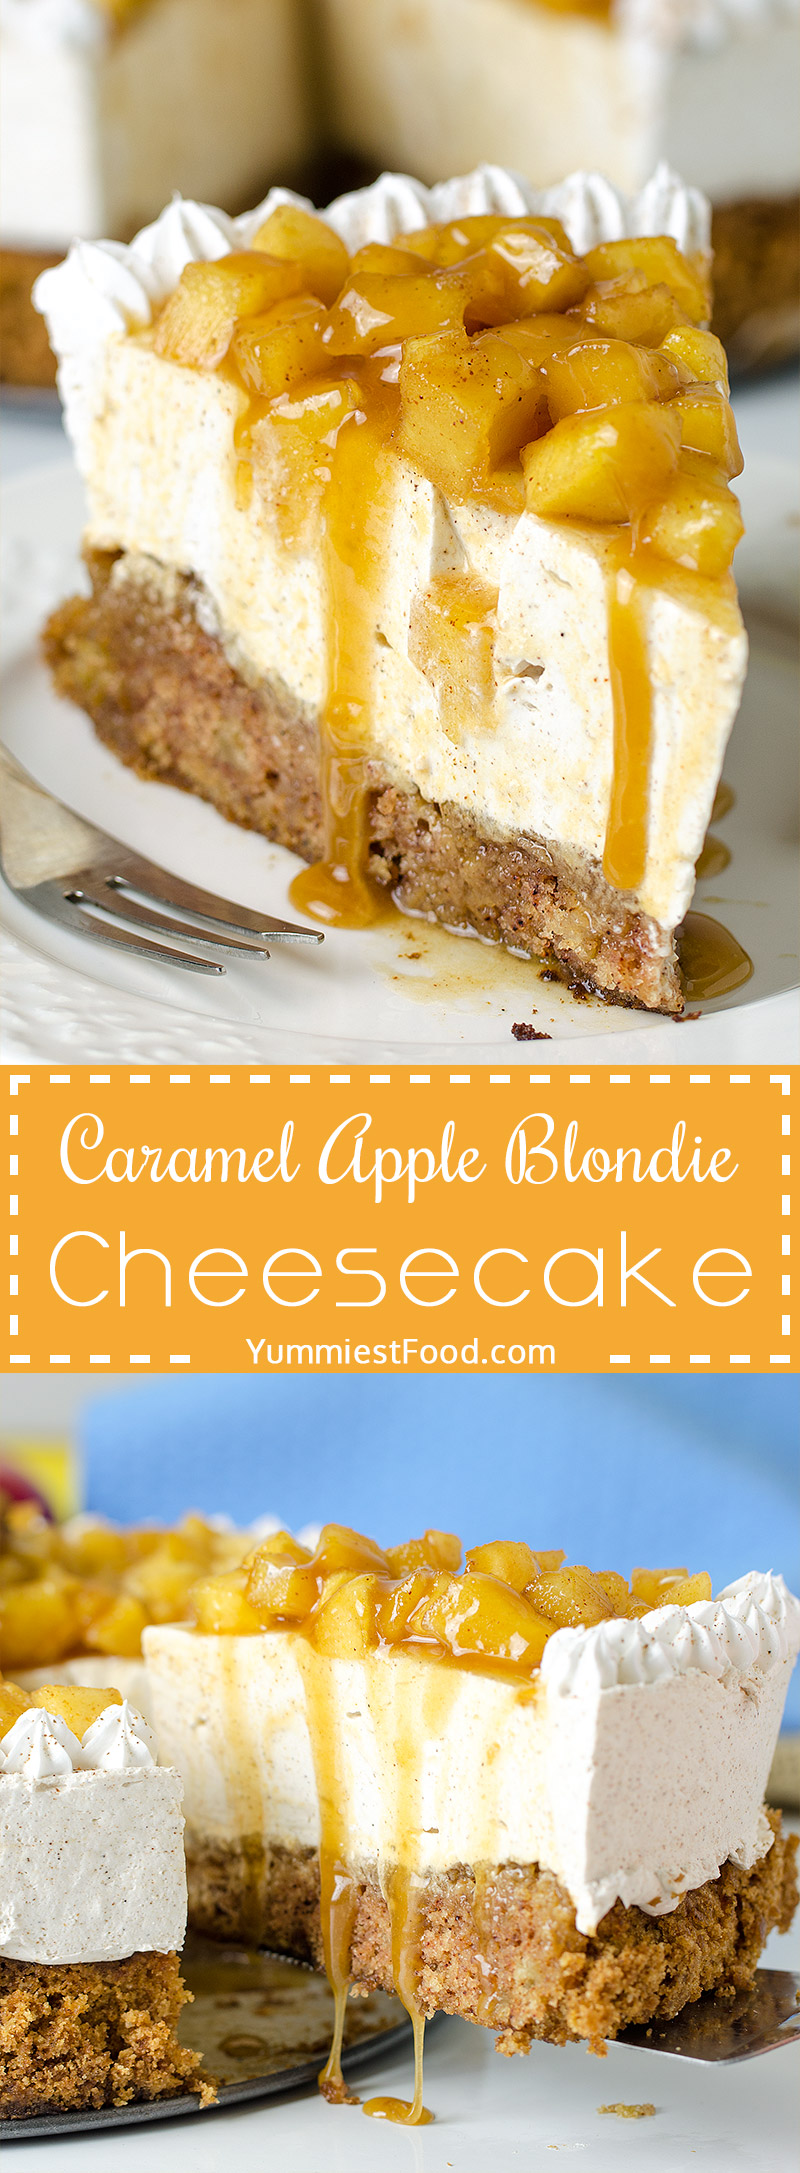 CARAMEL APPLE BLONDIE CHEESECAKE - This delicious cake is perfectly moist and has cinnamon apples infused in each and every bite